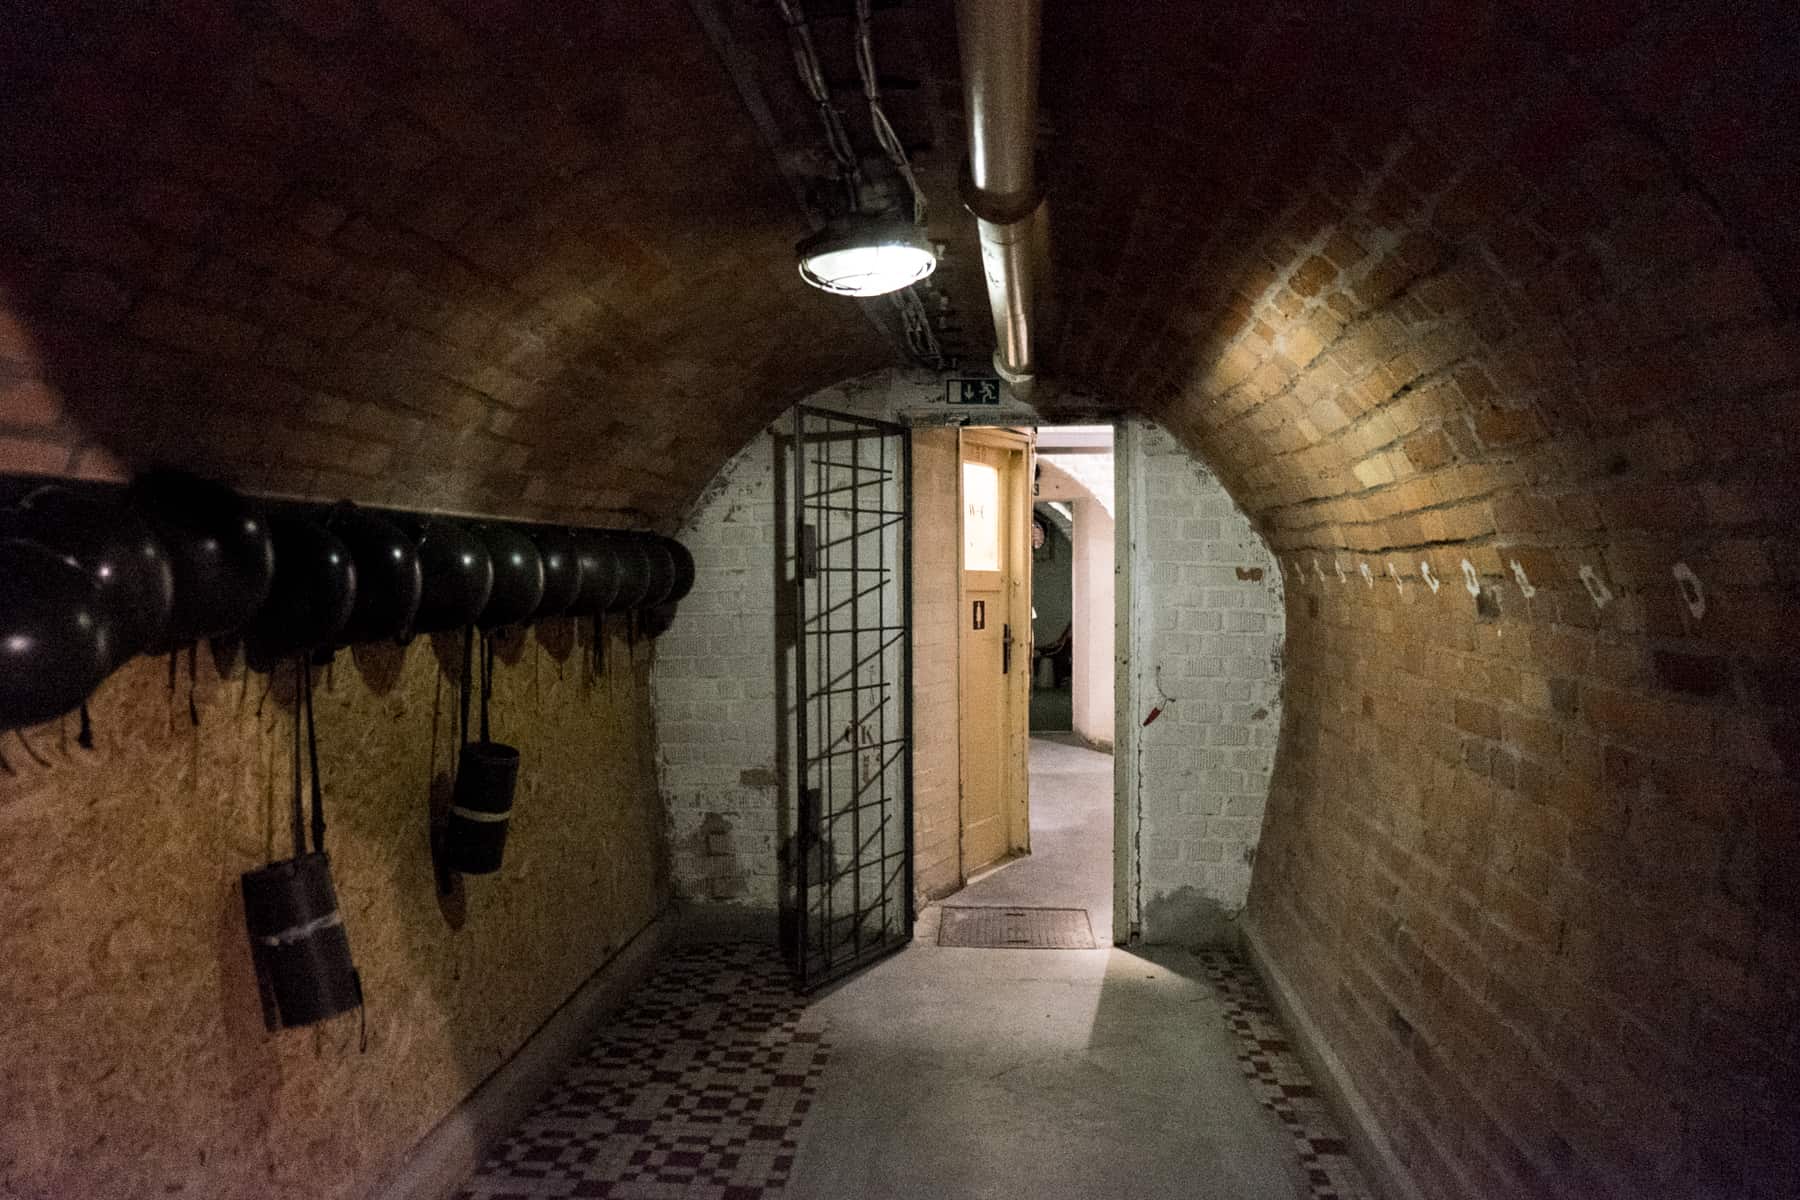 A circular brick-walled corridor lined with helmets leading to anther underground room in the Brno bunker. 